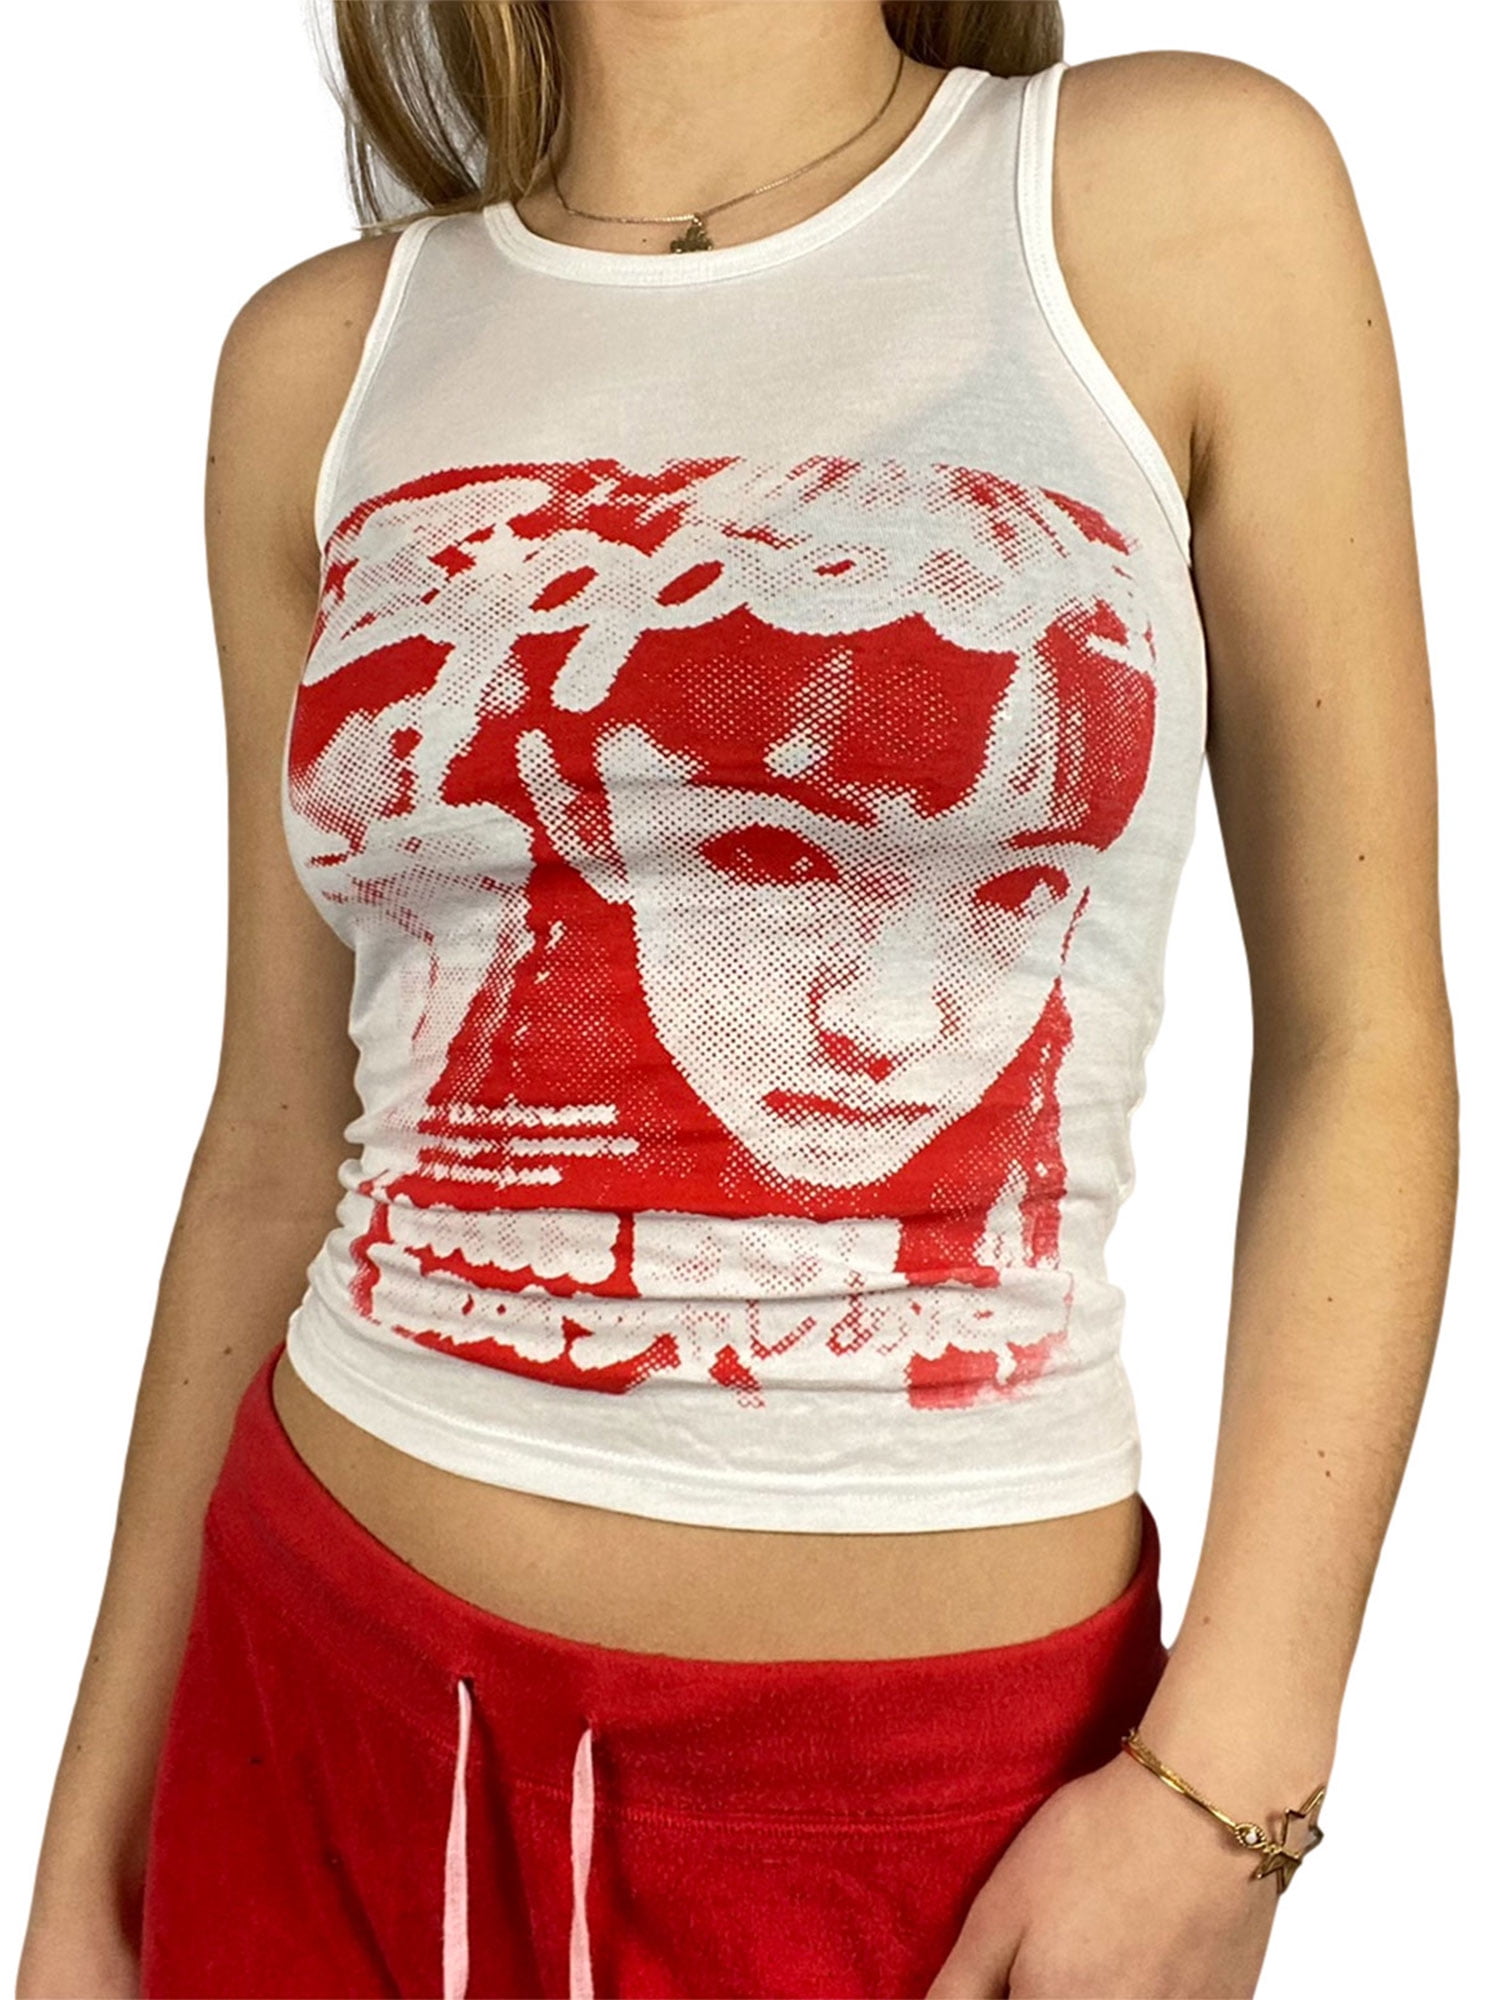 Women's Vintage Cami Tank Tops,Sleeveless Graphic Face Portrait Print Round  Neck Slim Fit T-Shirt Tops 90s Streetwear 